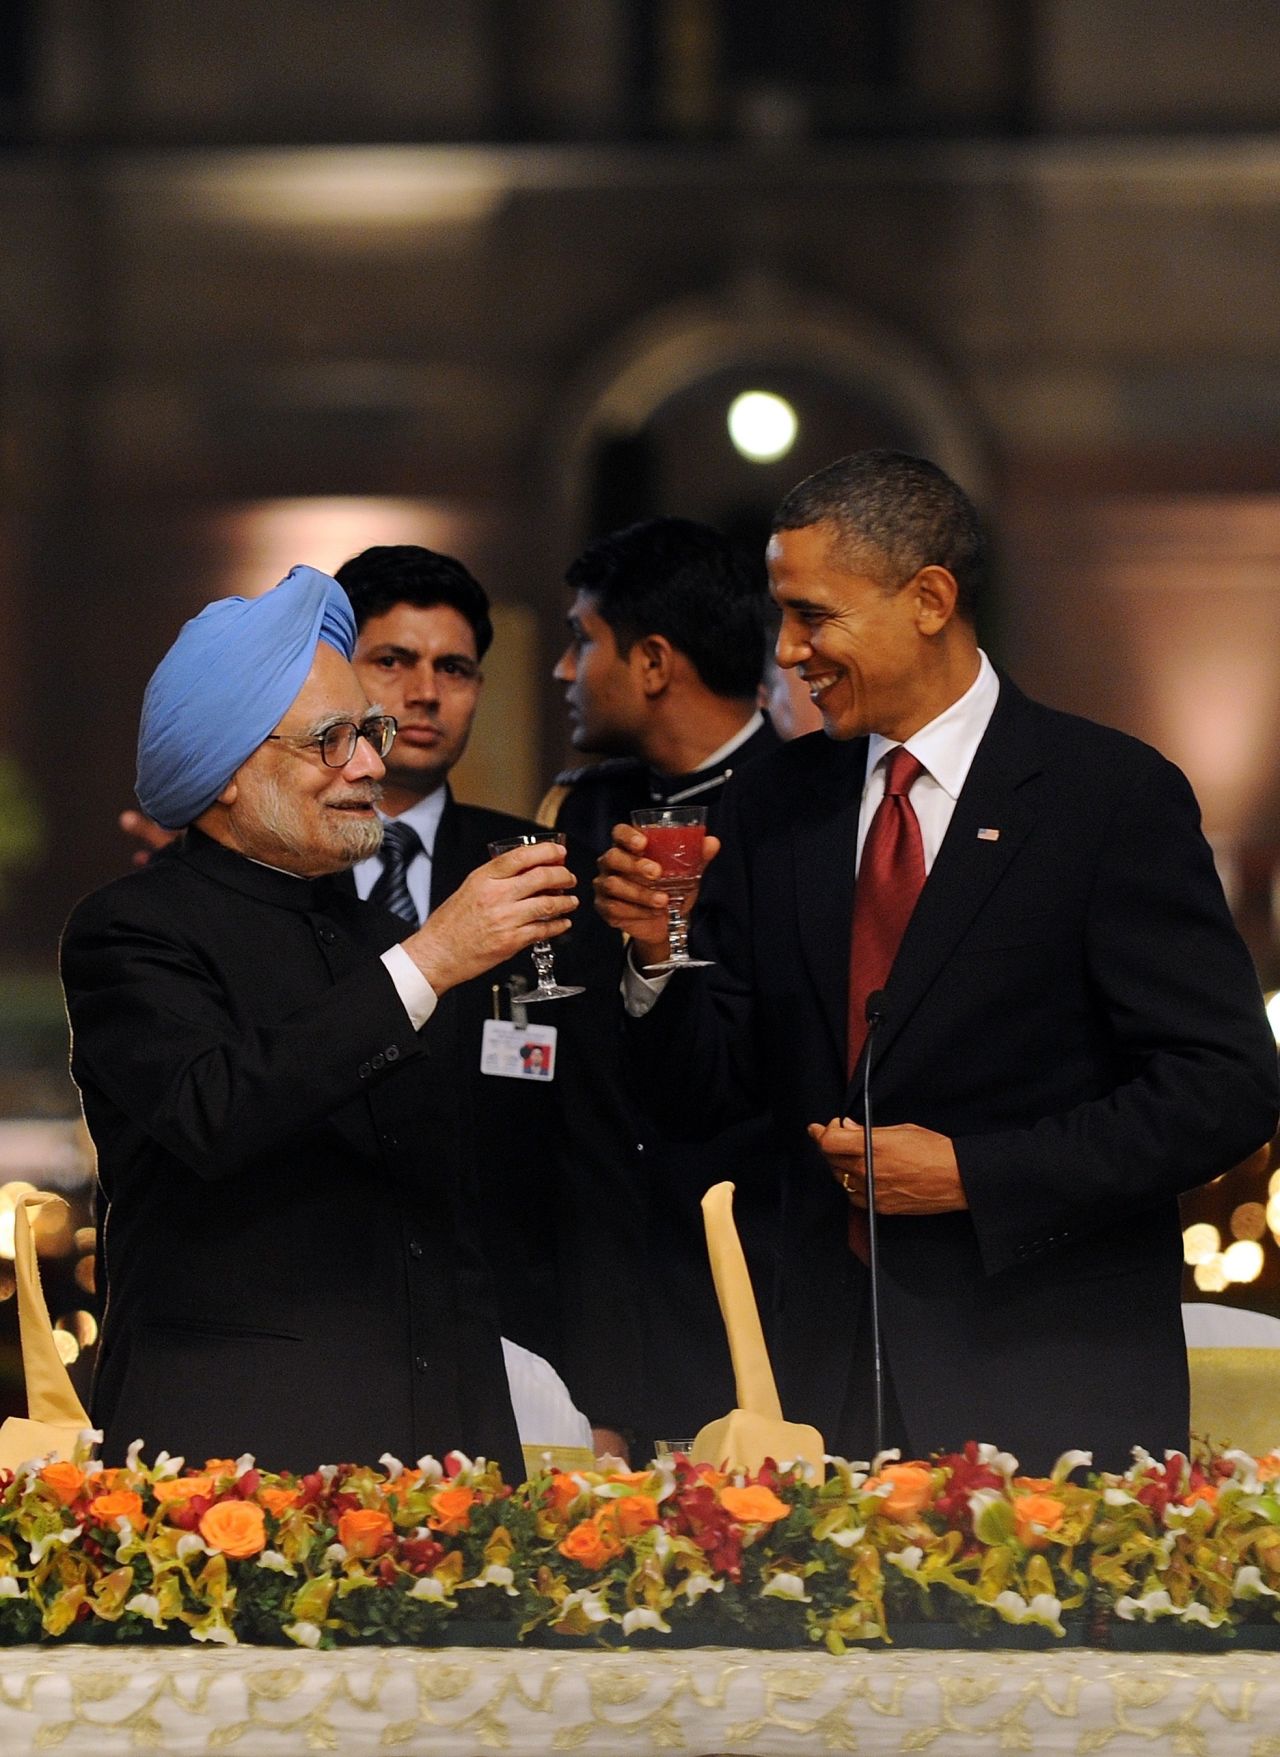 While India-U.S. ties continue to deepen -- Obama (shown with Indian Prime Minister Manmohan Singh in 2010) has supported India's quest for a permanent Security Council seat -- some believe a Republican president is better for India.